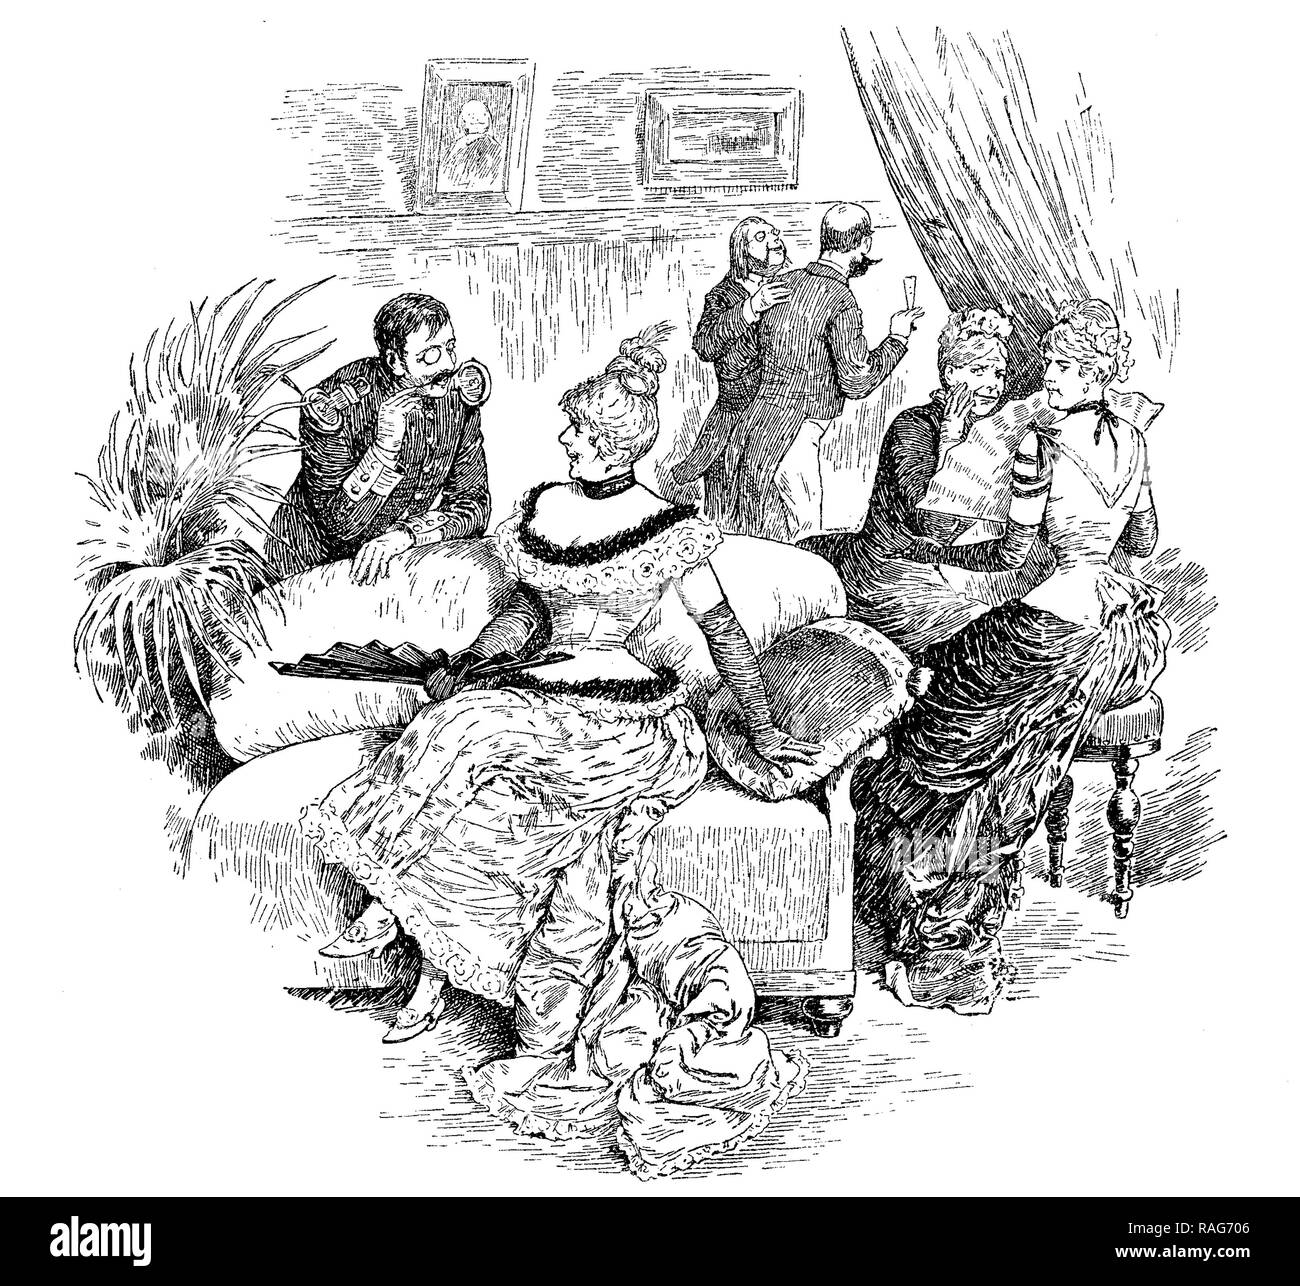 Gentleman officer with monocle flirts with voluptuous woman at the party while two other ladies look at them gossiping, vintage illustration Stock Photo